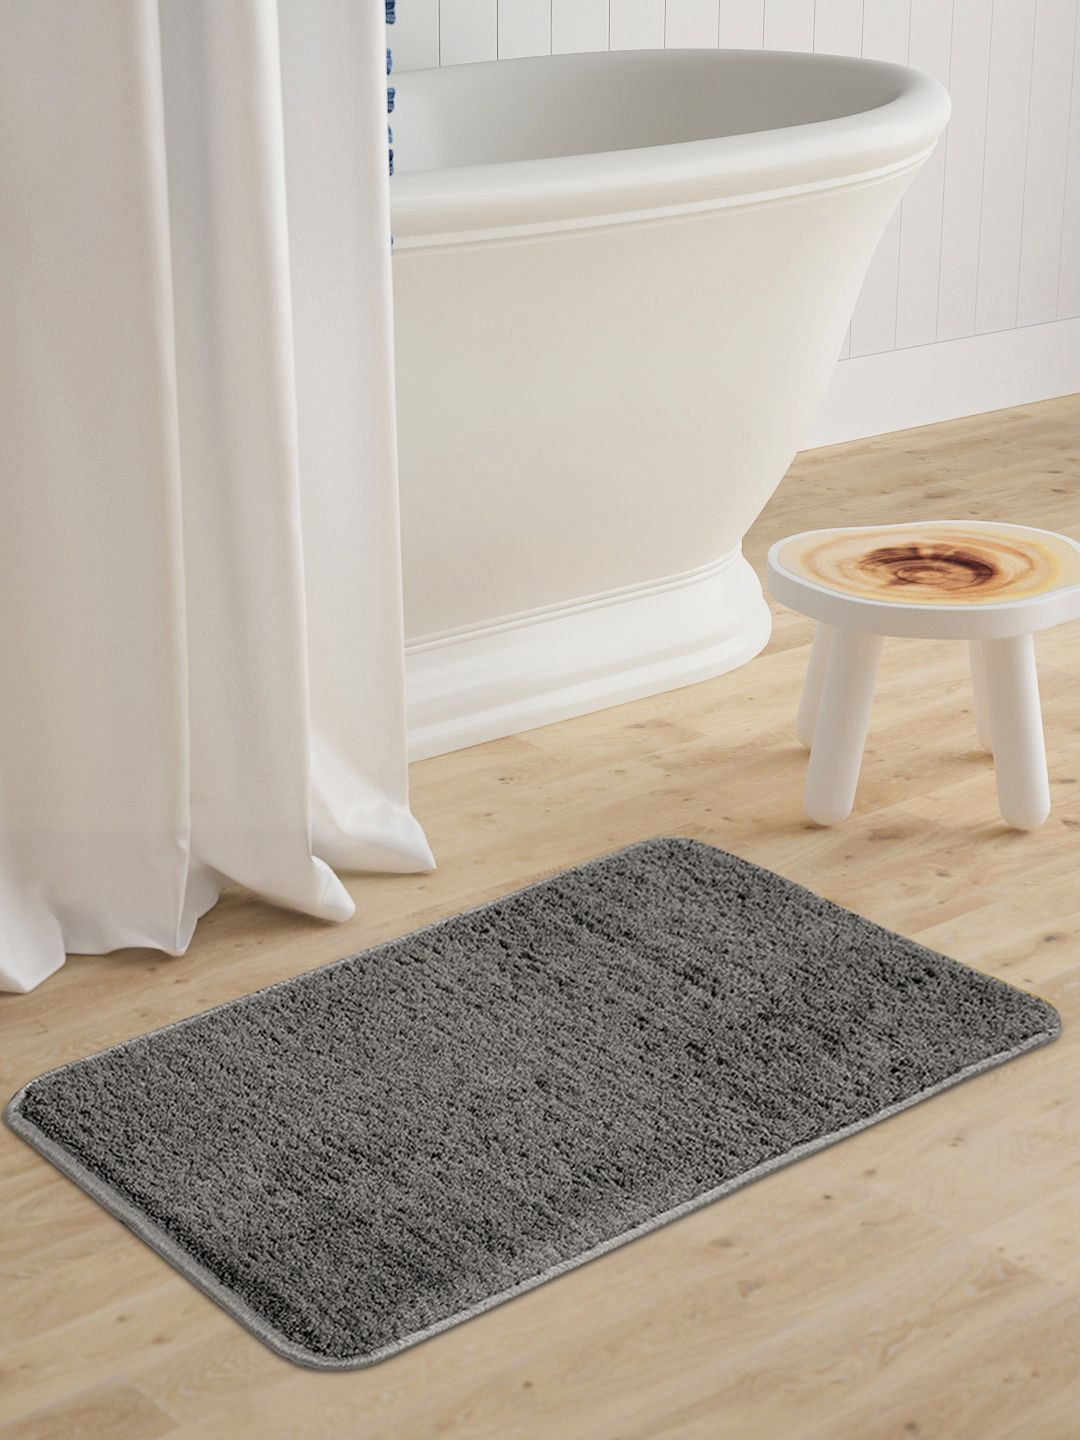 Saral Home Grey Solid Neo Shaggy Yarn Microfibre Anti-Skid Bath Mat Price in India